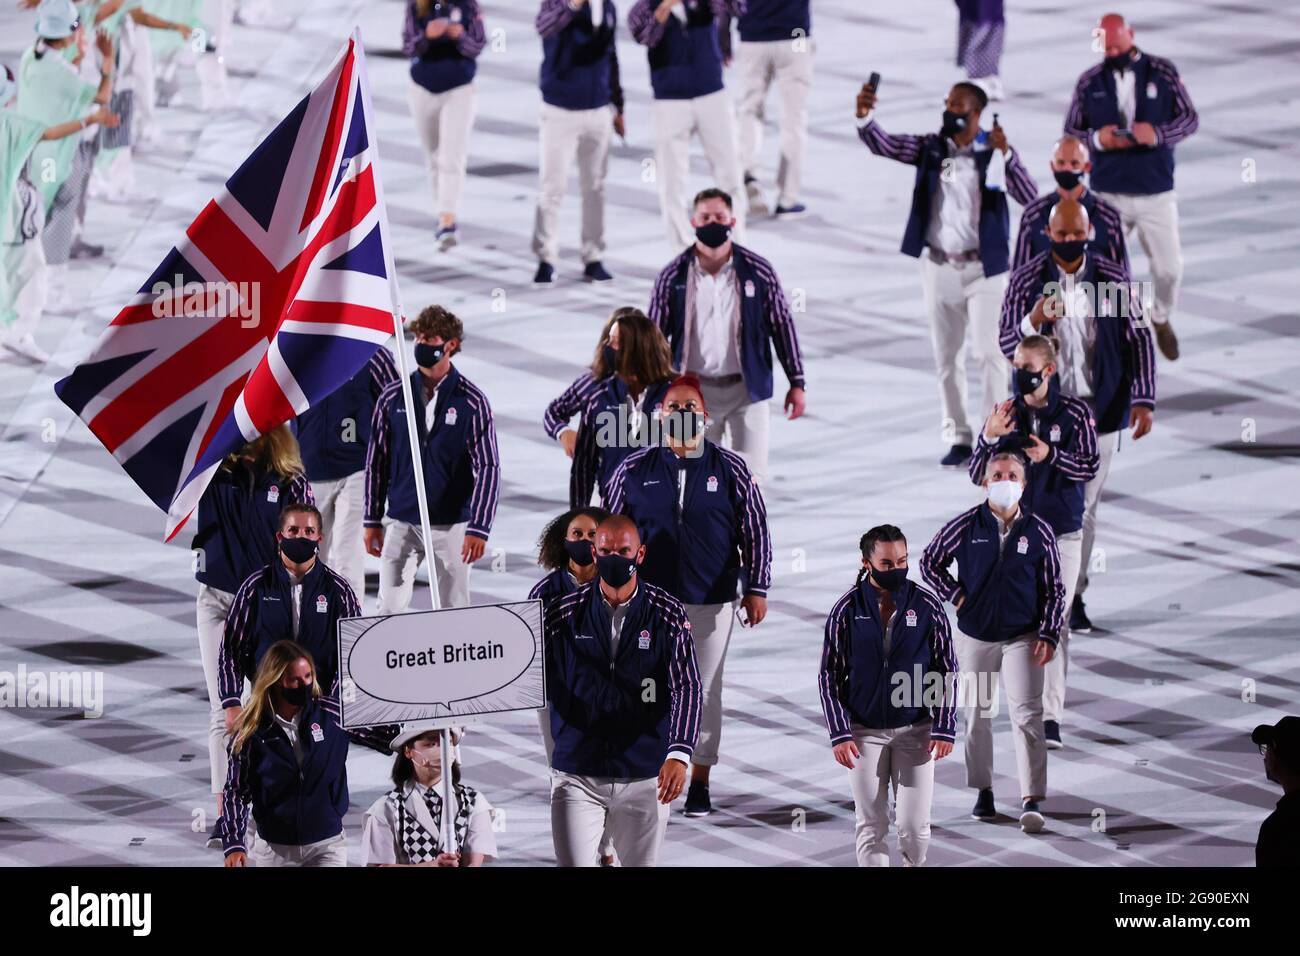 Tokyo, Japan . 23rd July, 2021. Great Britain Delegation (GBR), JULY 23, 2021 : Tokyo 2020 Olympic Games Opening Ceremony at the Olympic Stadium in Tokyo, Japan. Credit: Yohei Osada/AFLO SPORT/Alamy Live News Credit: Aflo Co. Ltd./Alamy Live News Stock Photo